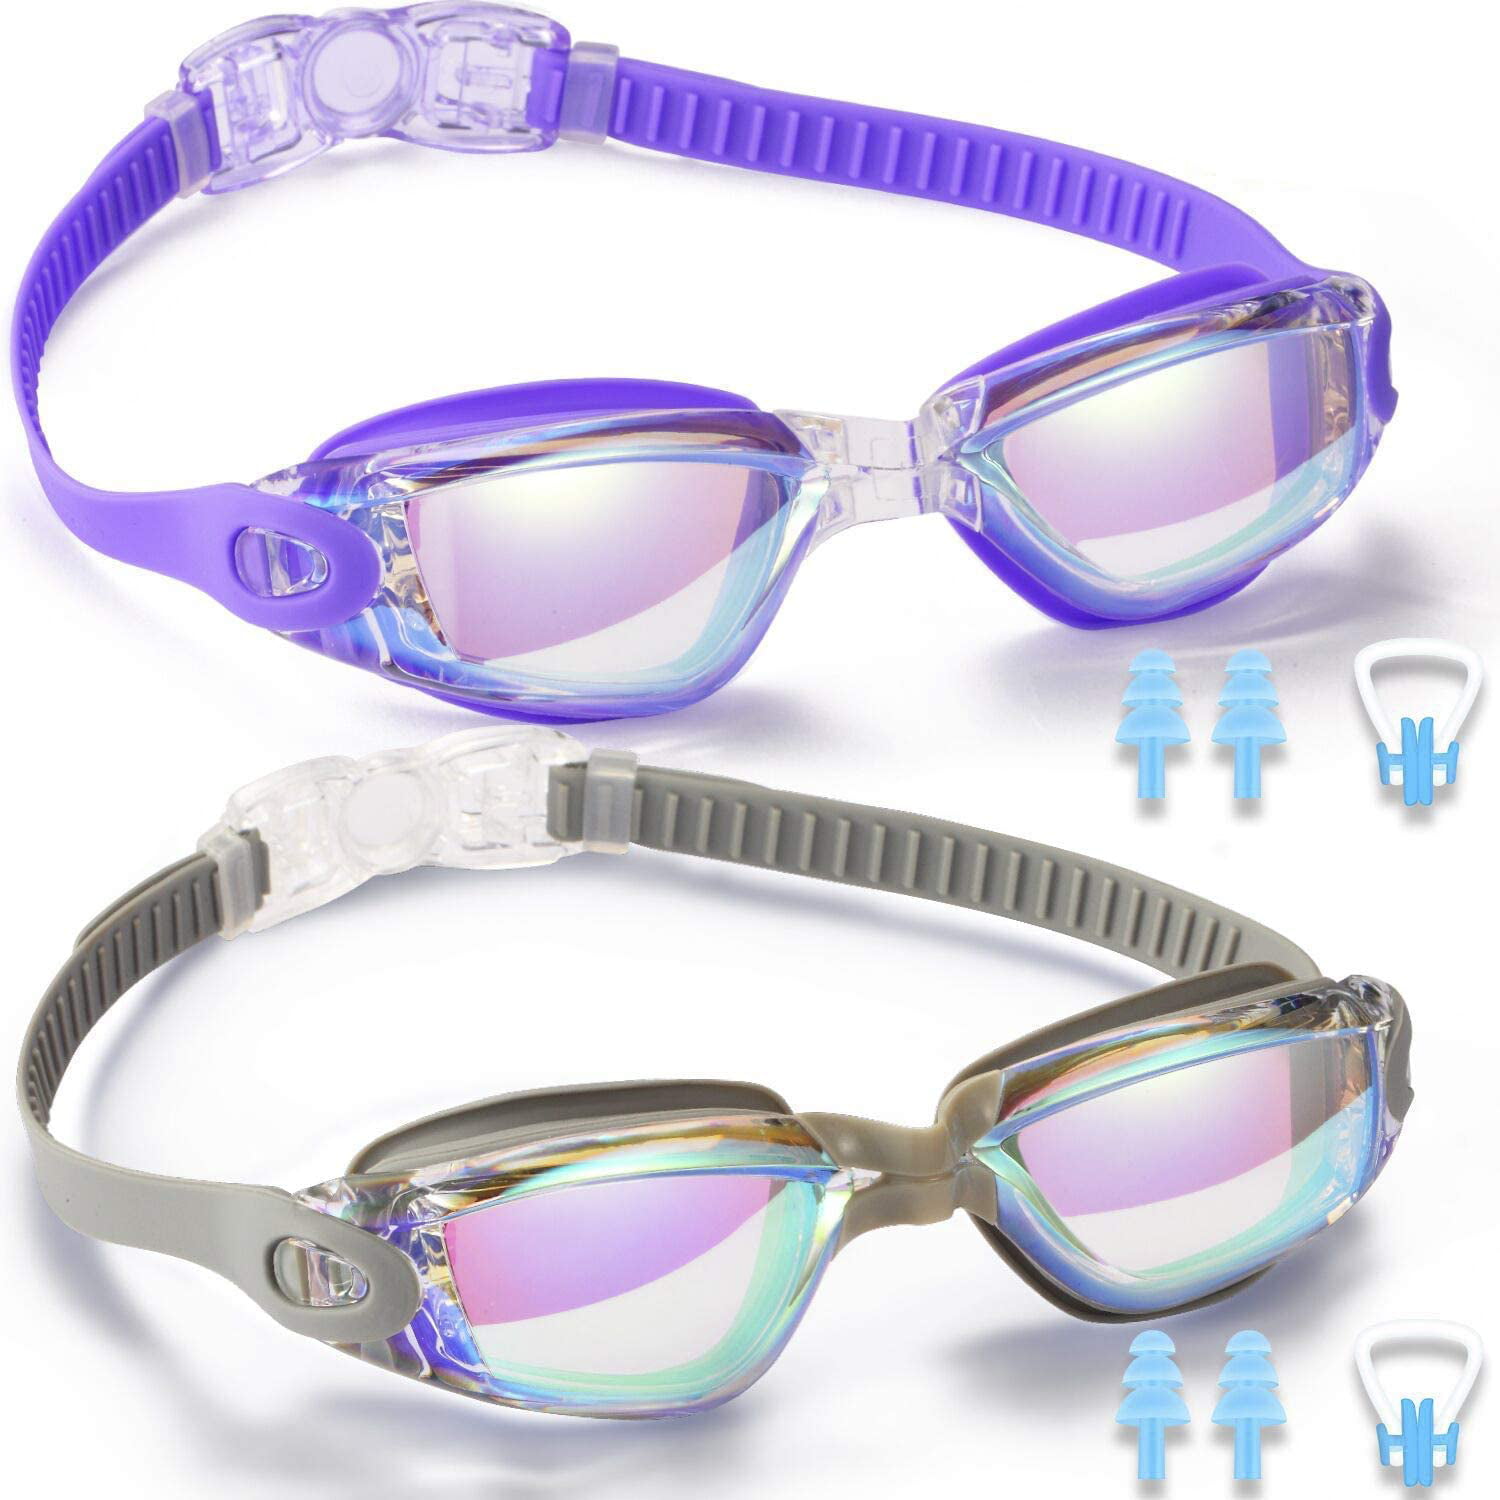 noorlee Swim Goggles 2 Pack Swimming Goggles for Adult Men Women Youth Kids Ch 